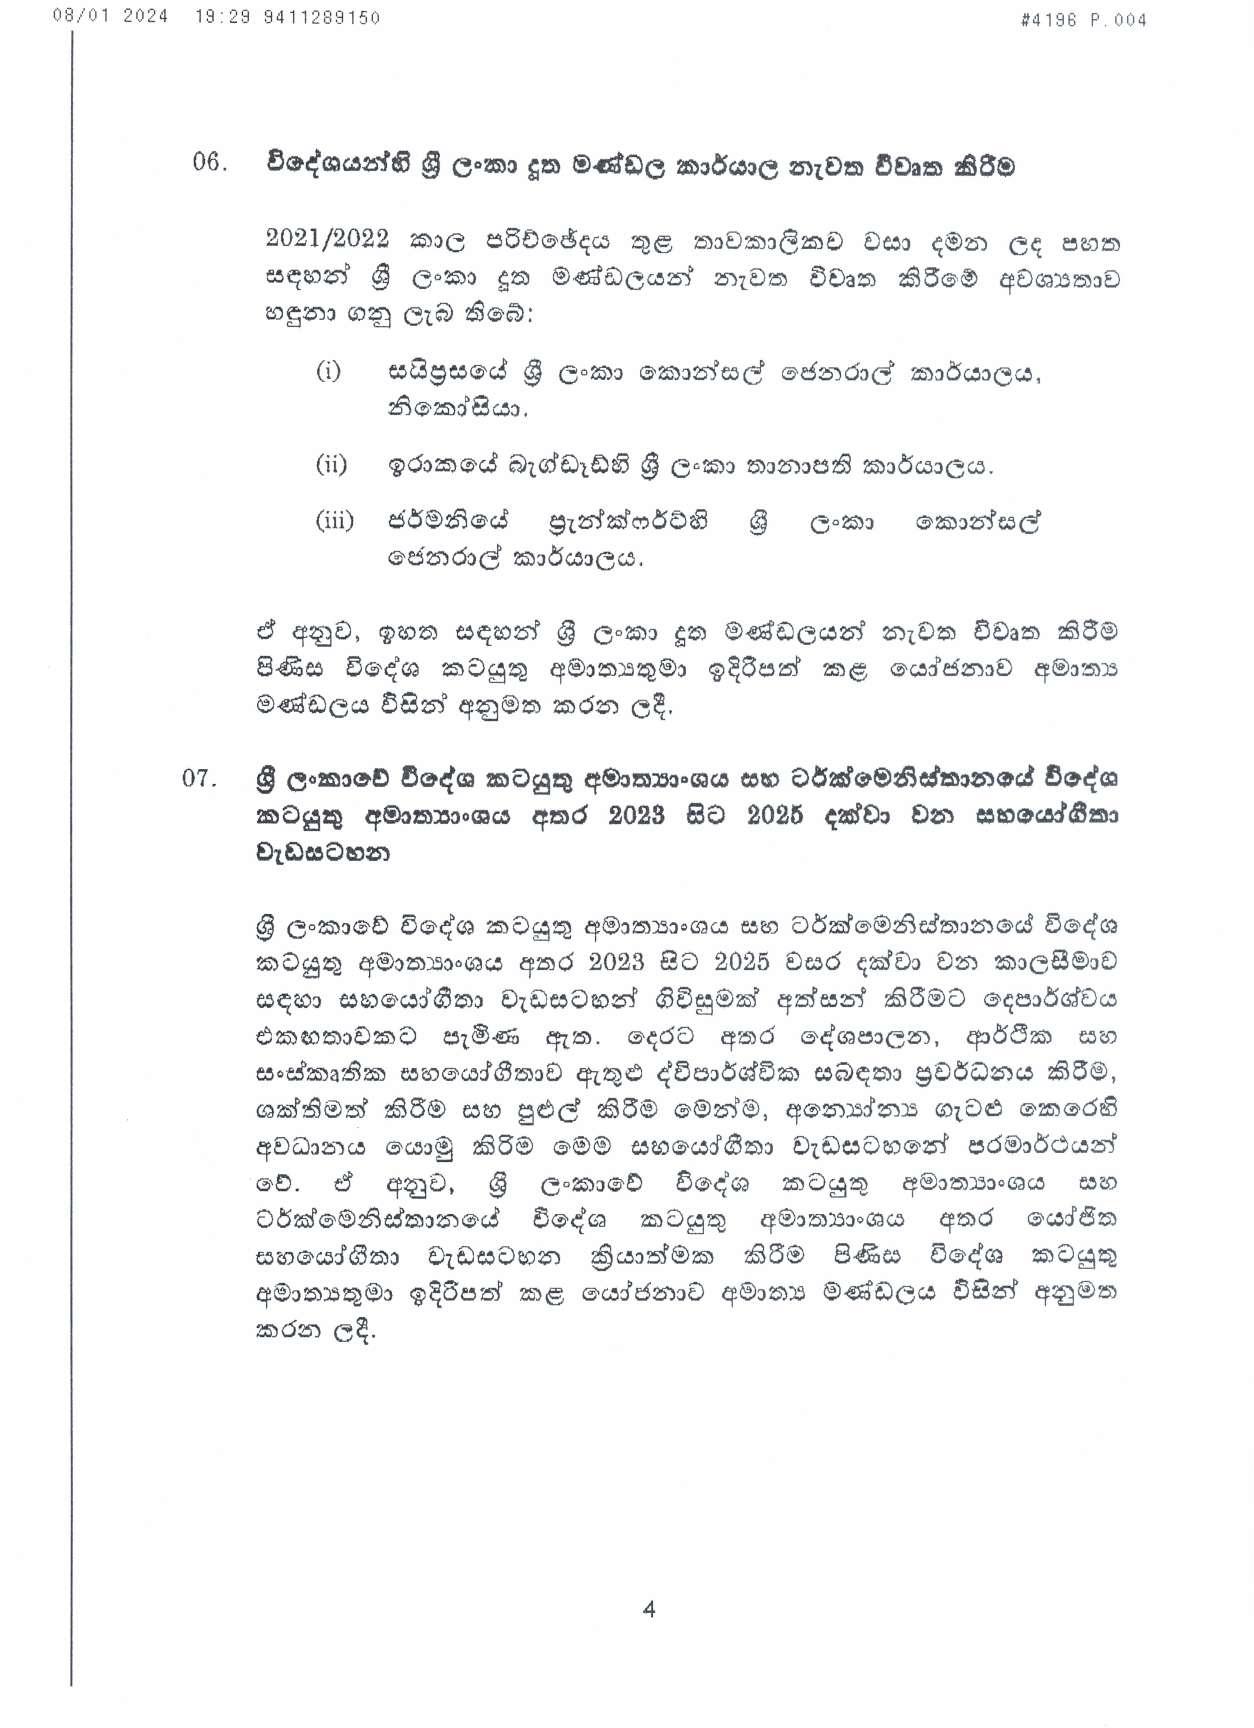 Cabinet Decision on 08.01.2024 page 004